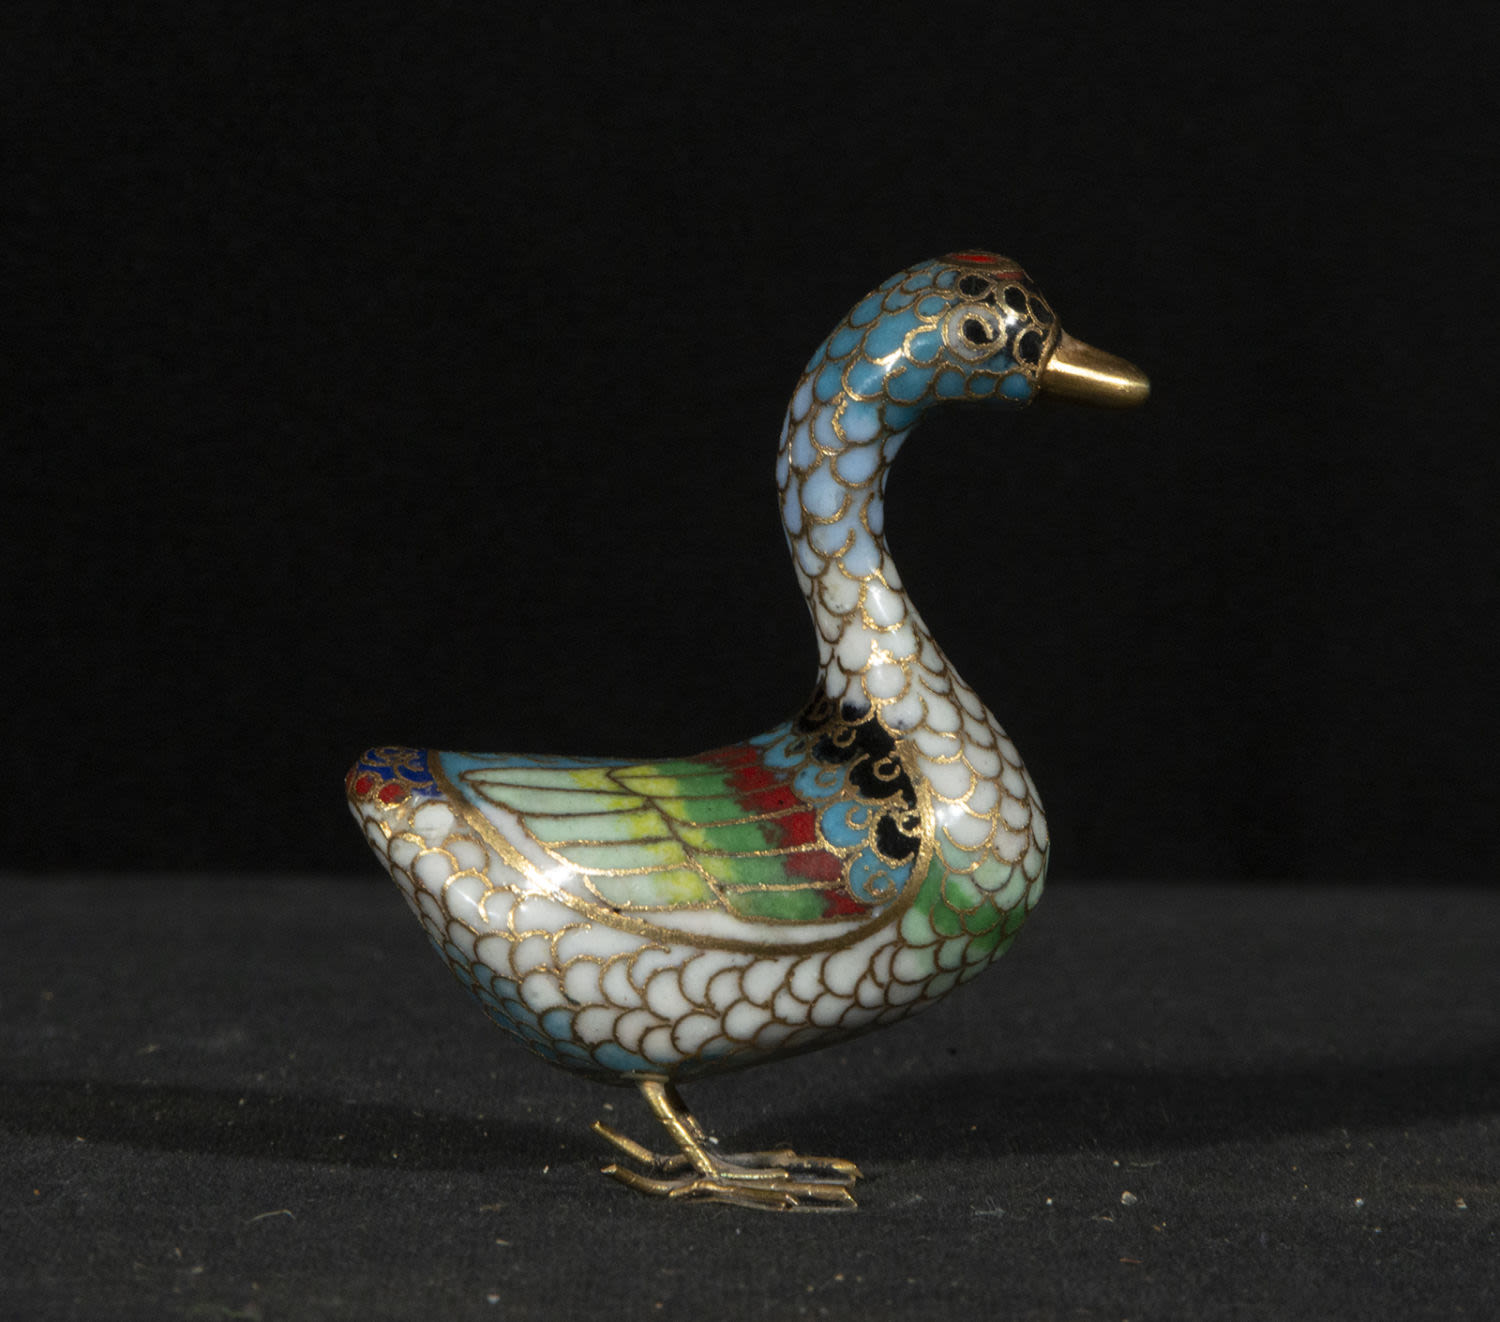 Pair of Chinese ducks in bronze filigree and cloisonné enamel, 20th century - Image 2 of 4